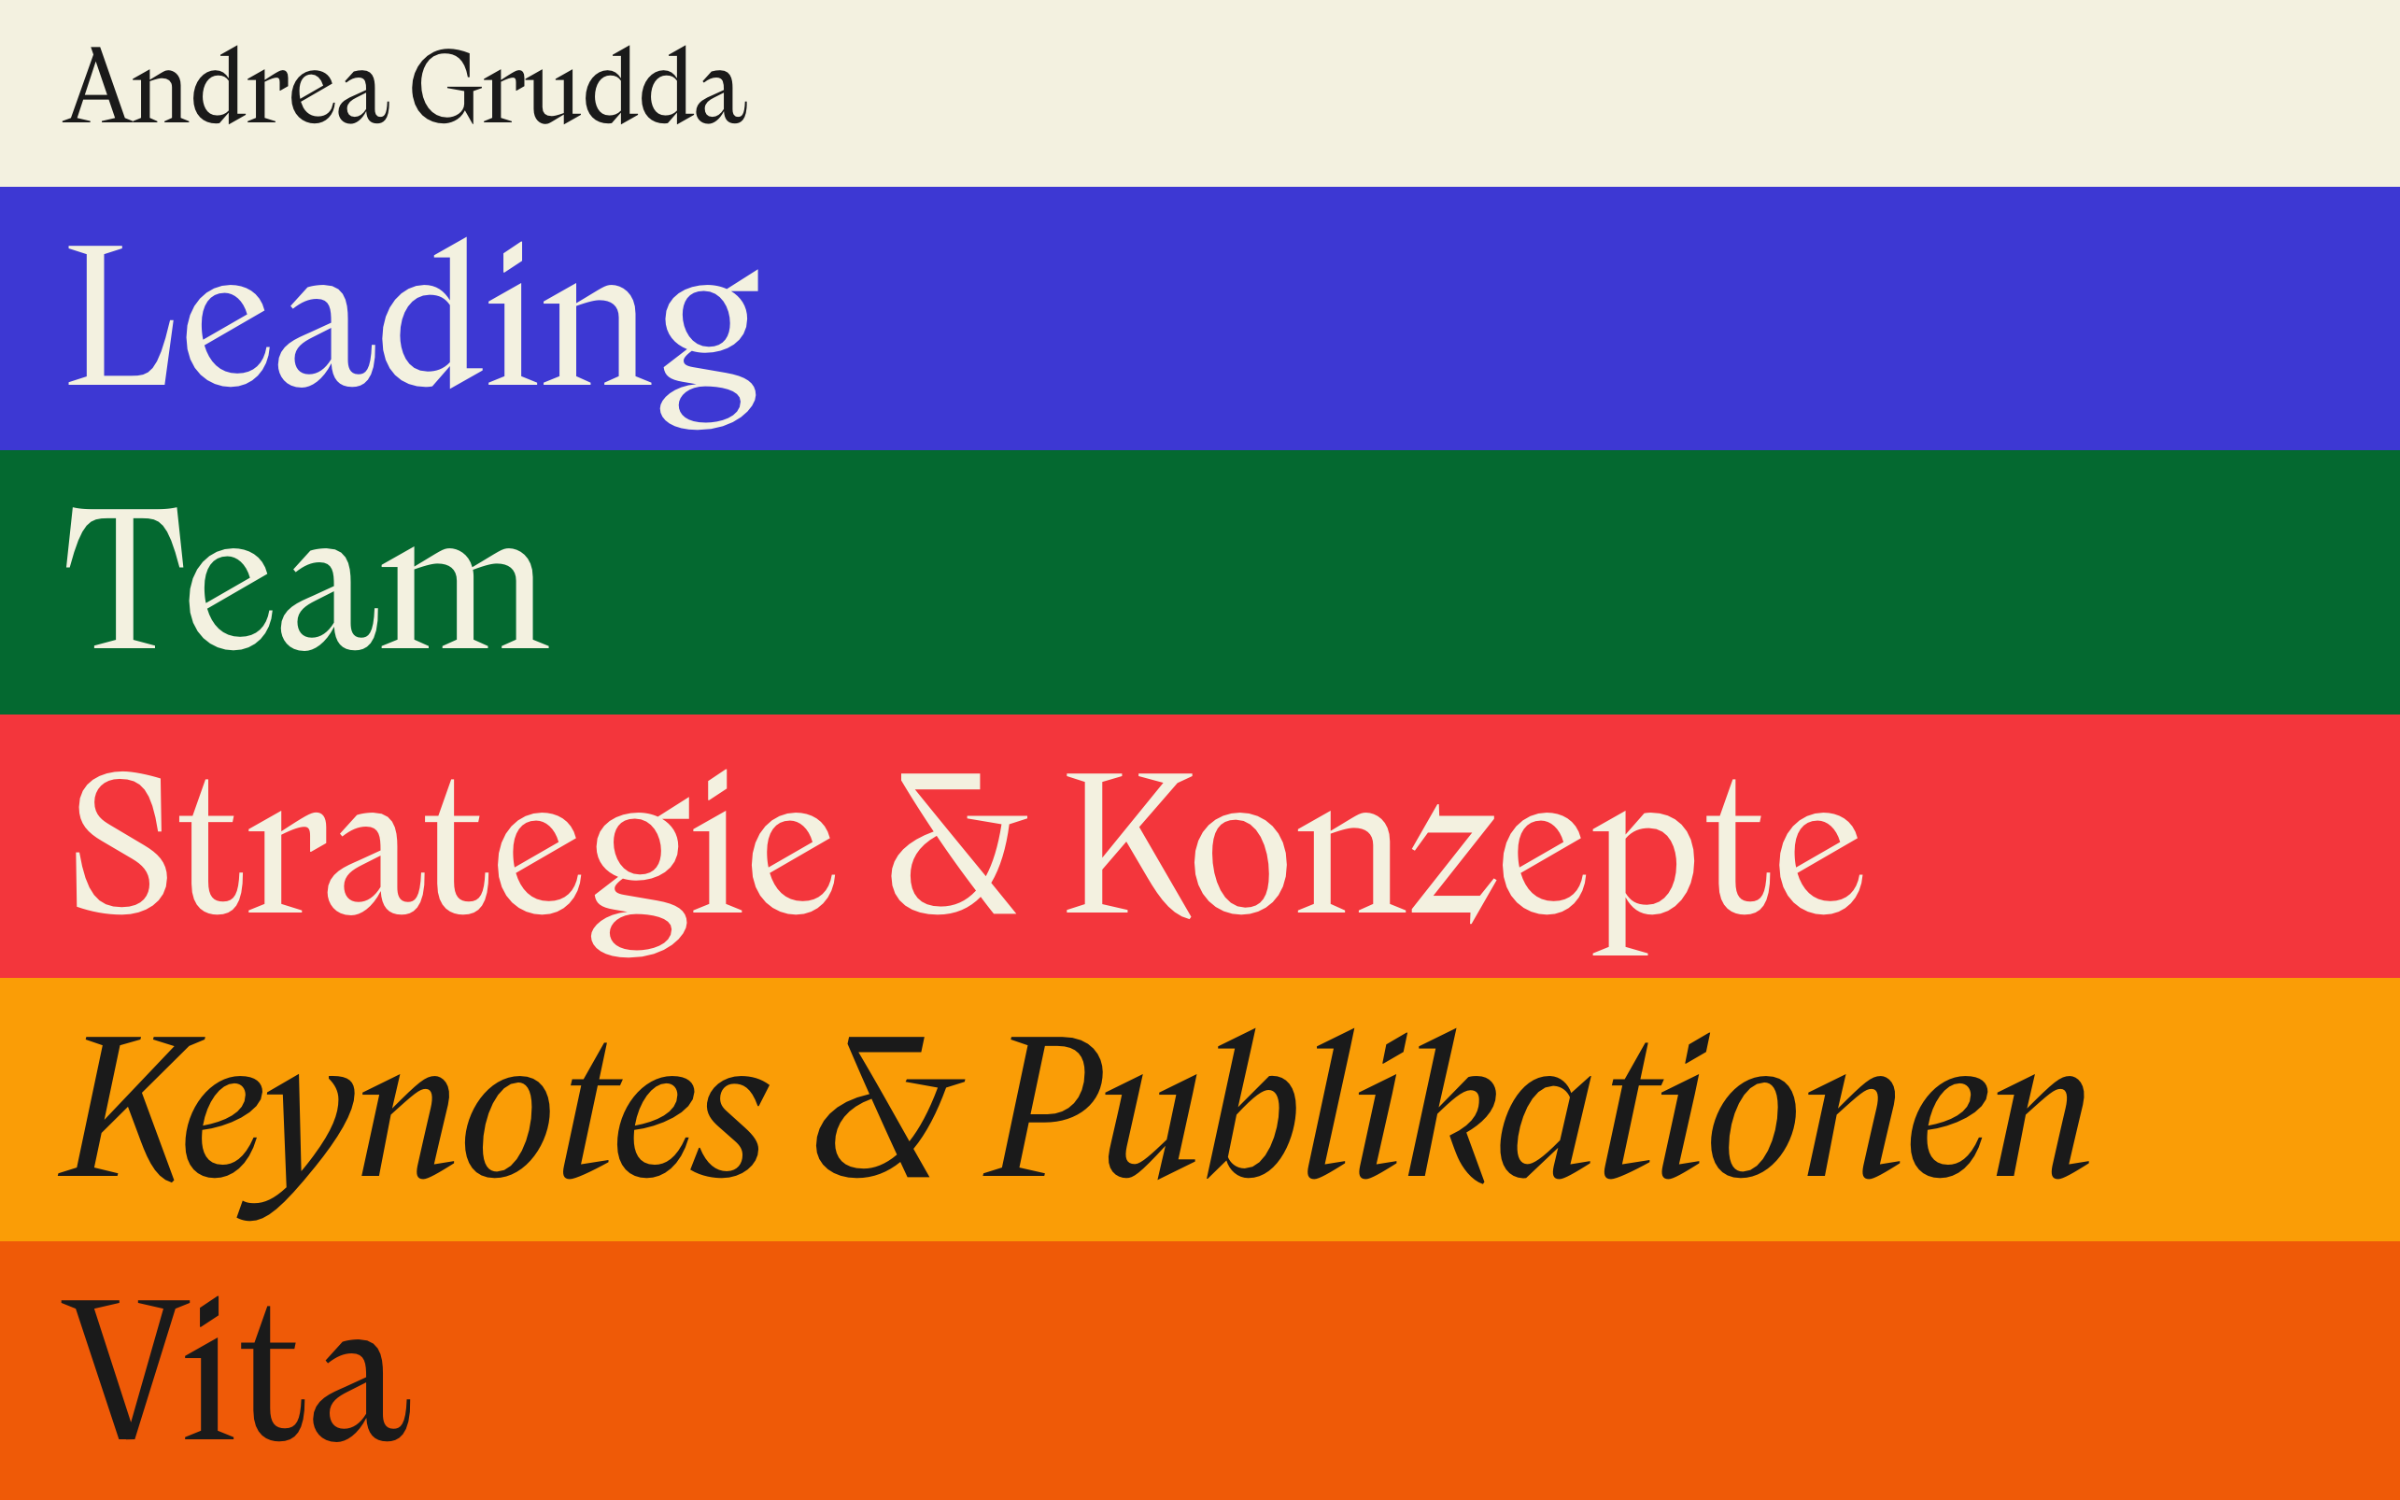 The typeface Nikolai in use for the website of Andrea Grudda, a renowned Author, Consultant and Trainer.